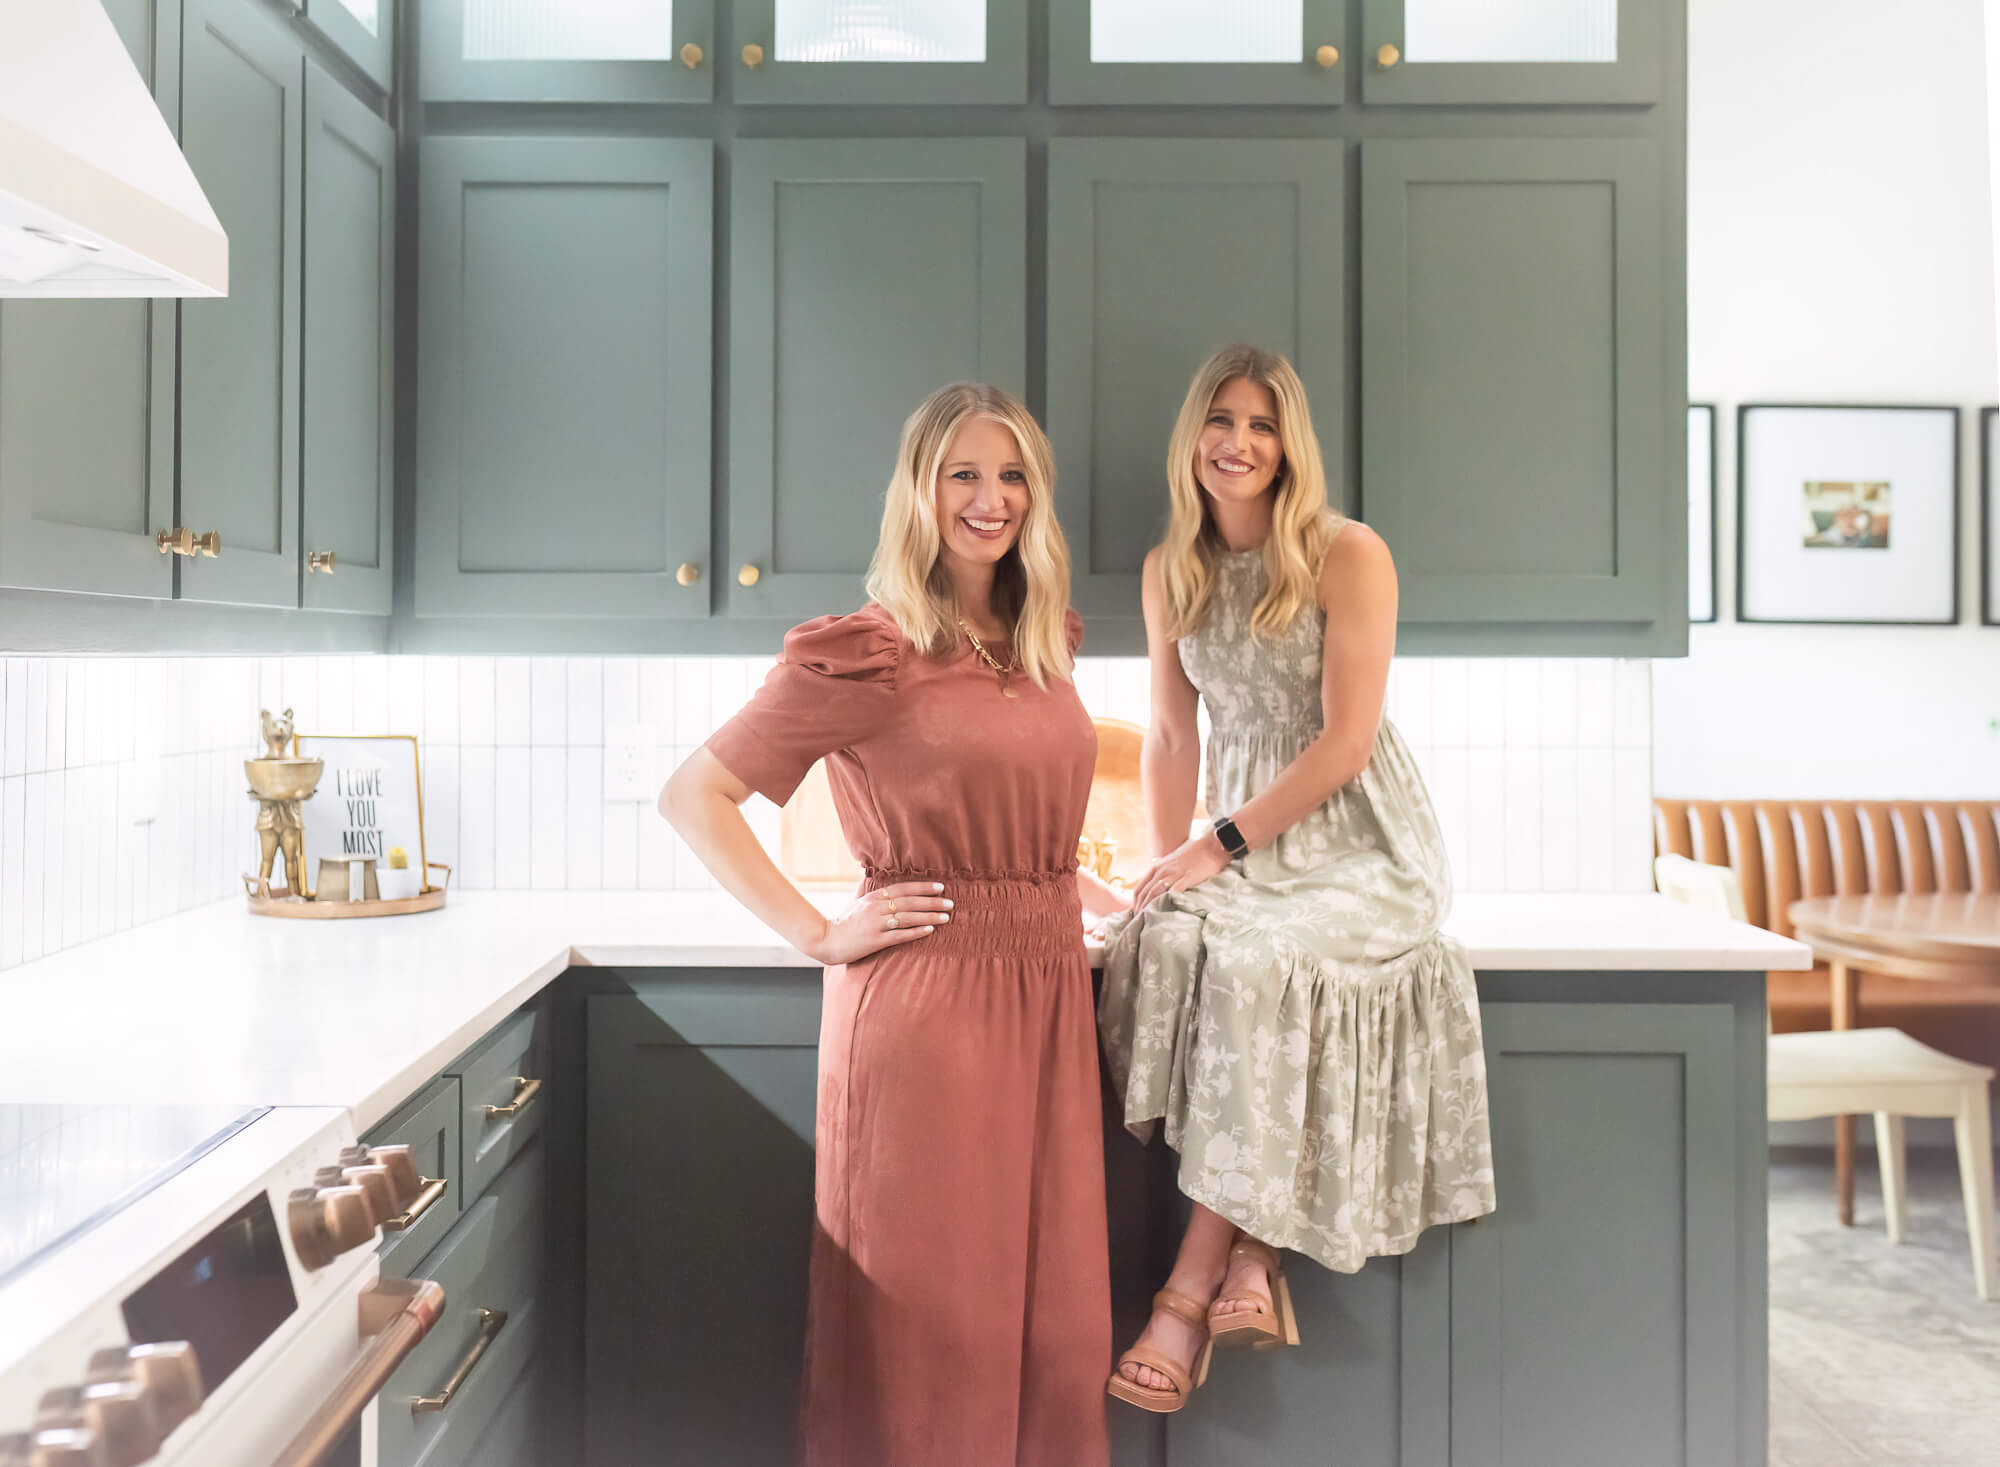 sister business owners posing in kitchen for branding photo session captured by Allison Amores Photography